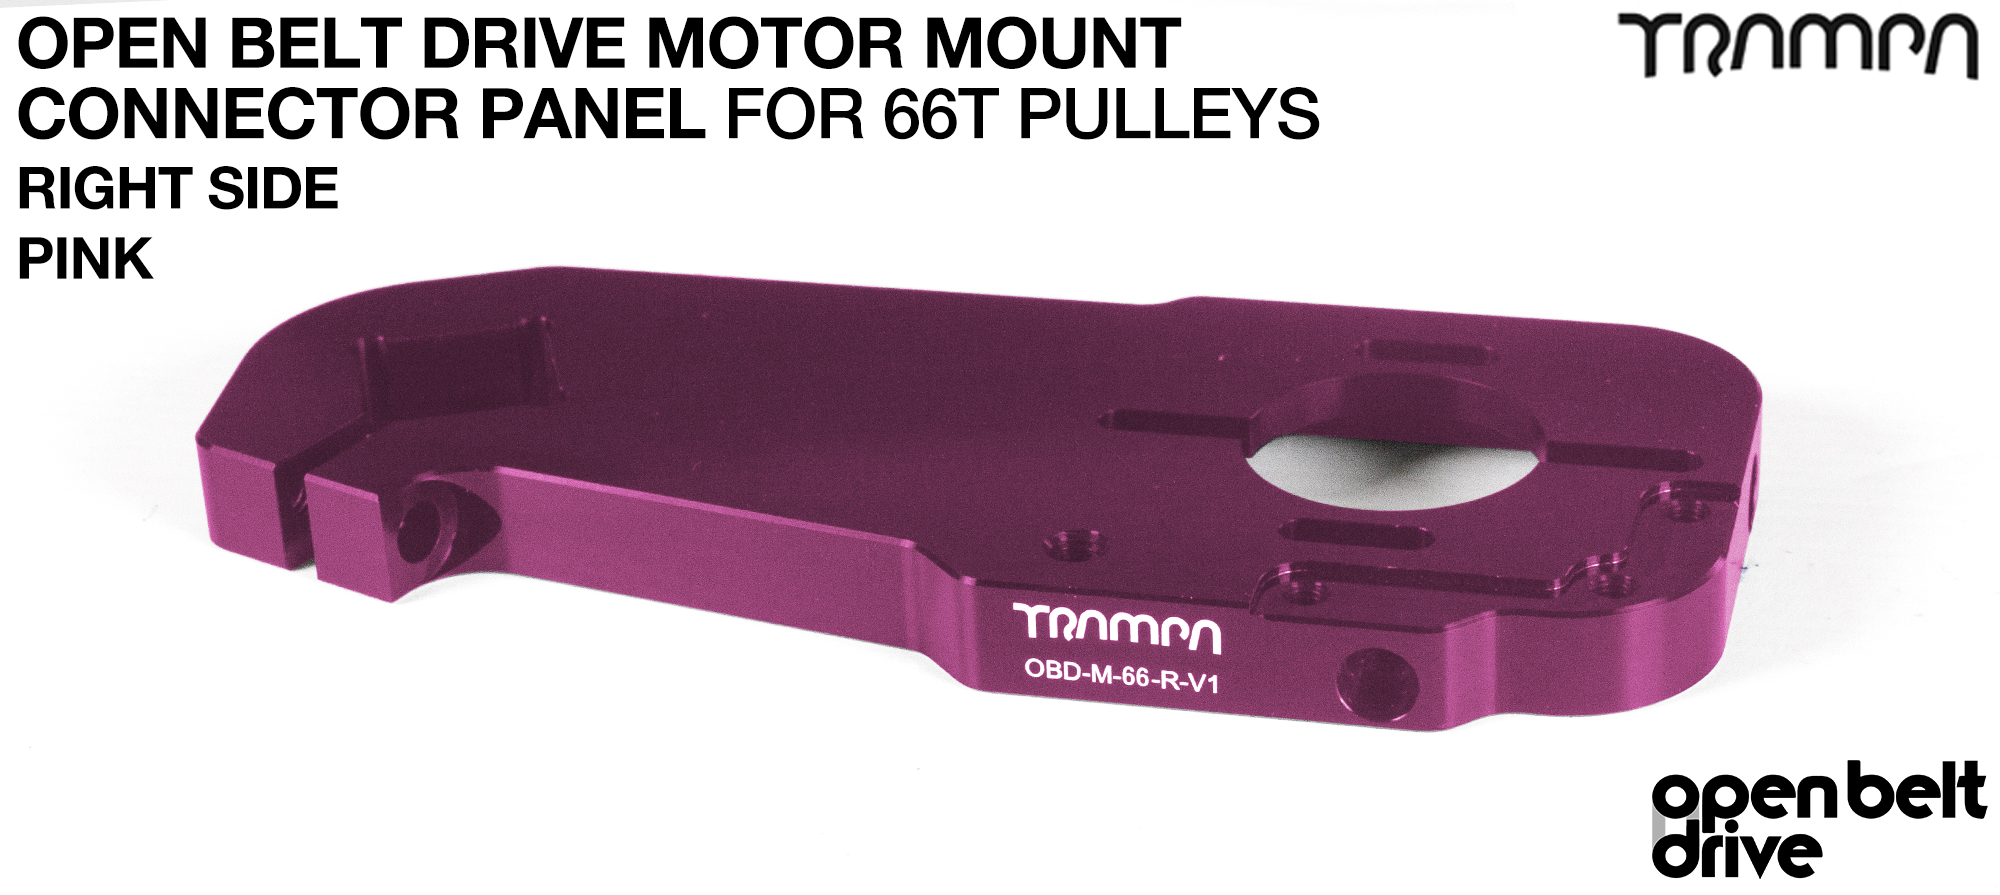 OBD Open Belt Drive Motor Mount Connector Panel for 66 tooth Pulleys - GOOFY - PINK